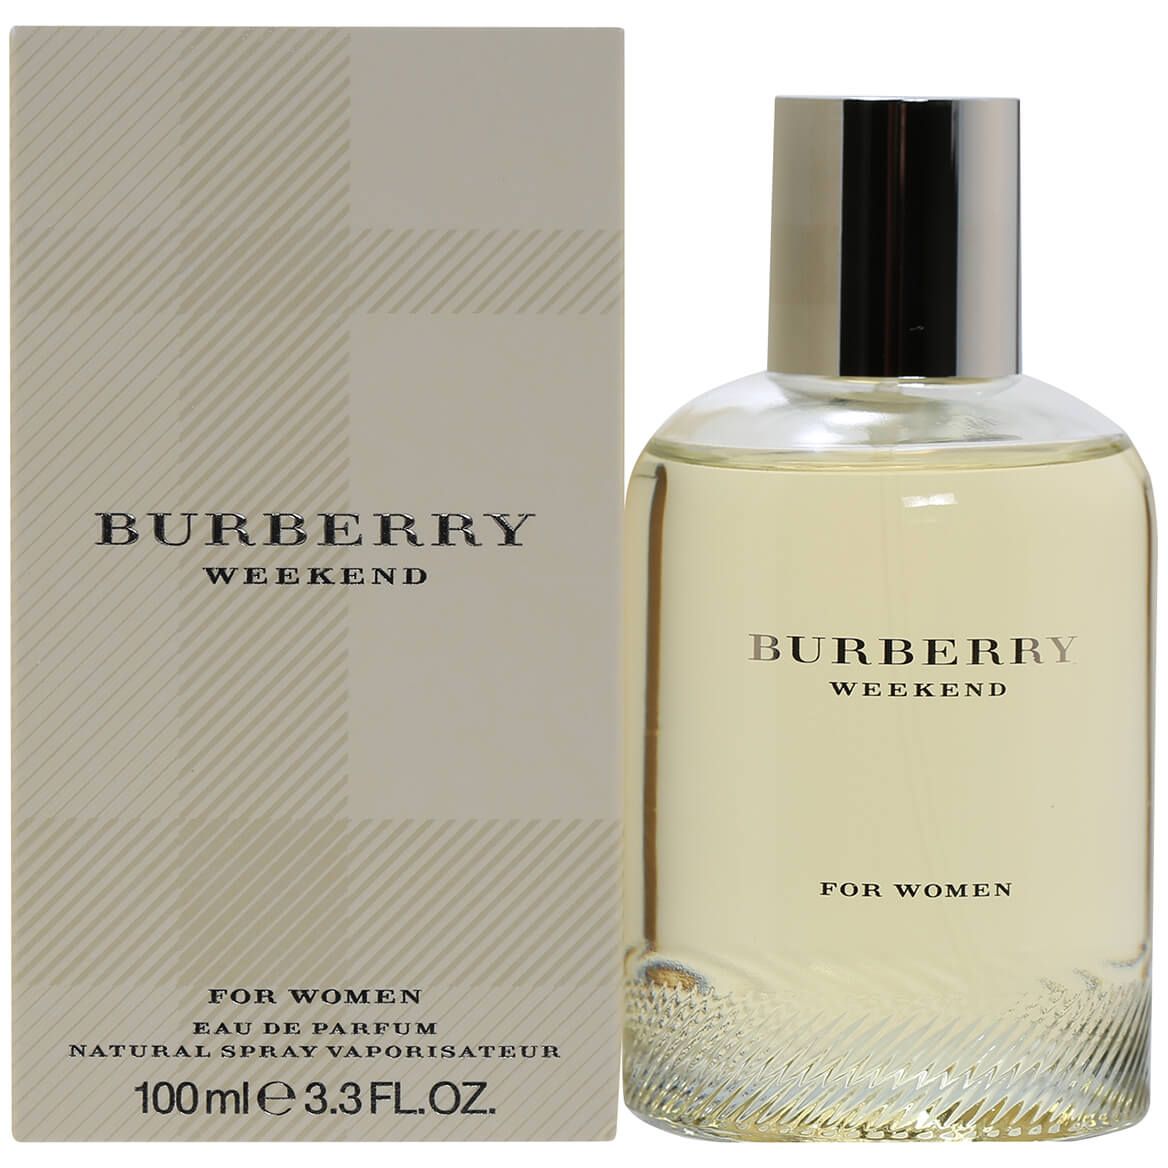 Burberry Weekend for Women EDP, 3.3 oz. + '-' + 373075